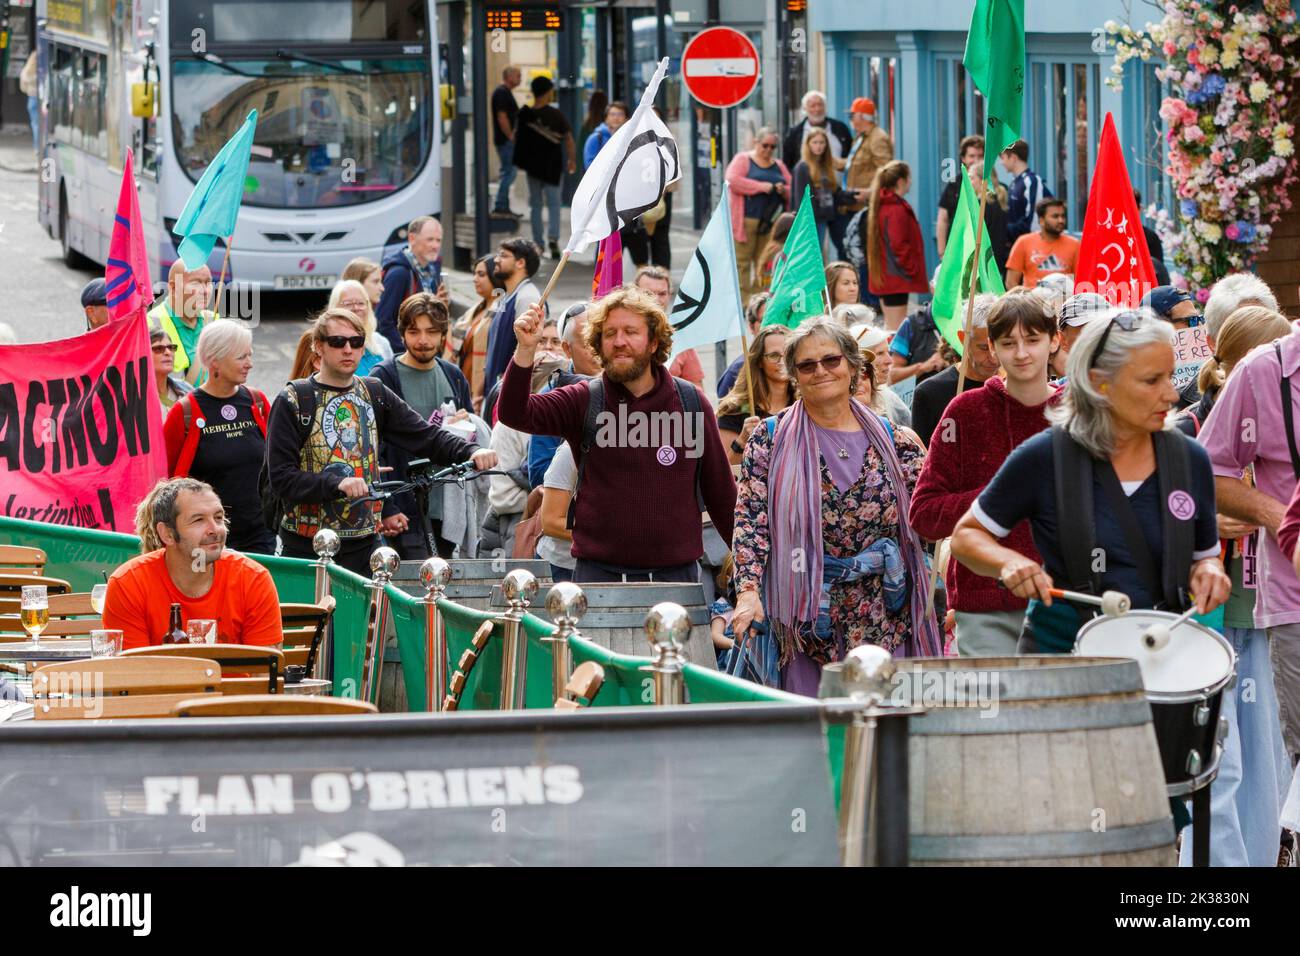 Bath, UK. 25th Sep, 2022. With PM Liz Truss signalling an acceleration of oil and gas extraction in the UK shoppers enjoying a drink look on as climate change protesters take part in a protest march through the centre of Bath. The protest organised by Extinction Rebellion was held in order to highlight how the cost of living crisis and the climate crisis are interlinked. Credit: Lynchpics/Alamy Live News Stock Photo